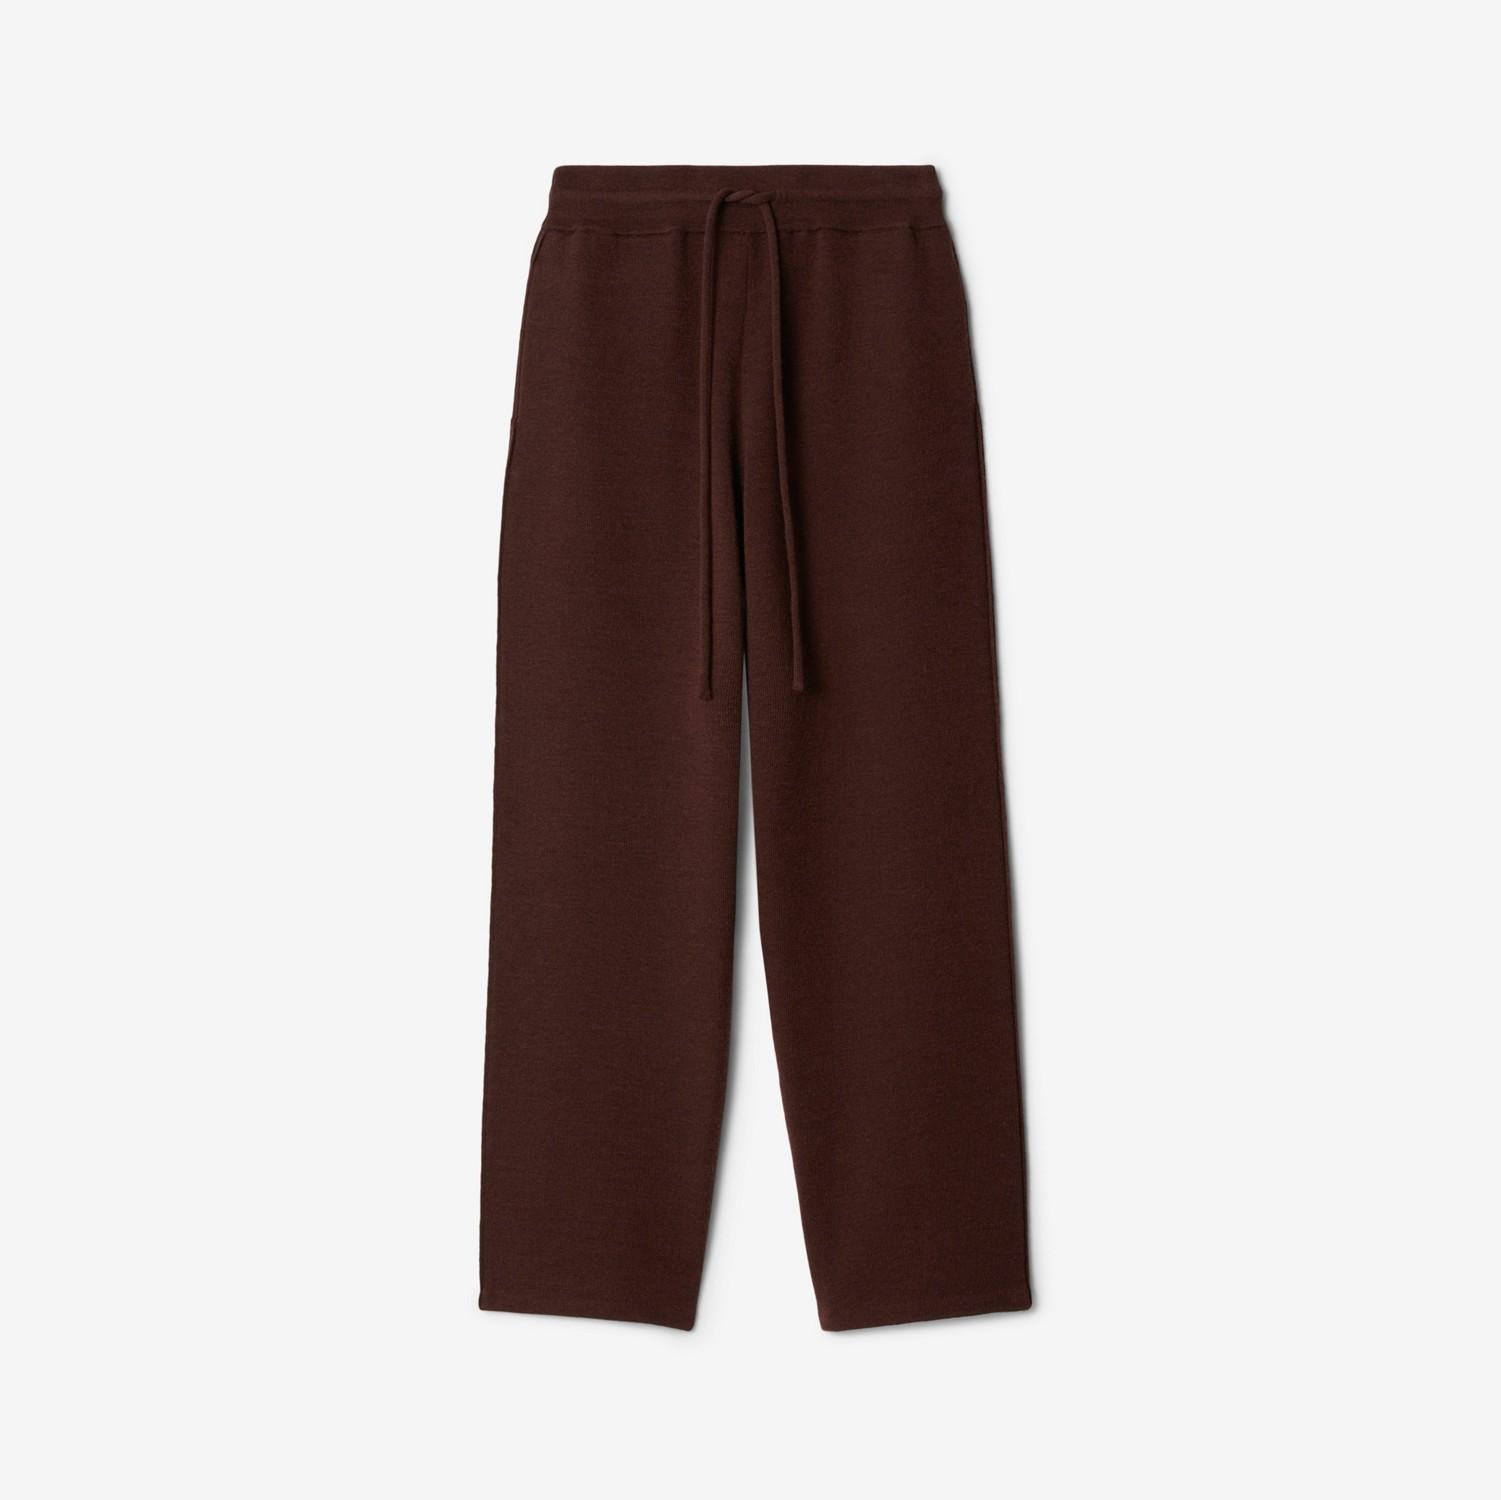 Petite Rose Wool Blend Track Pants by BURBERRY